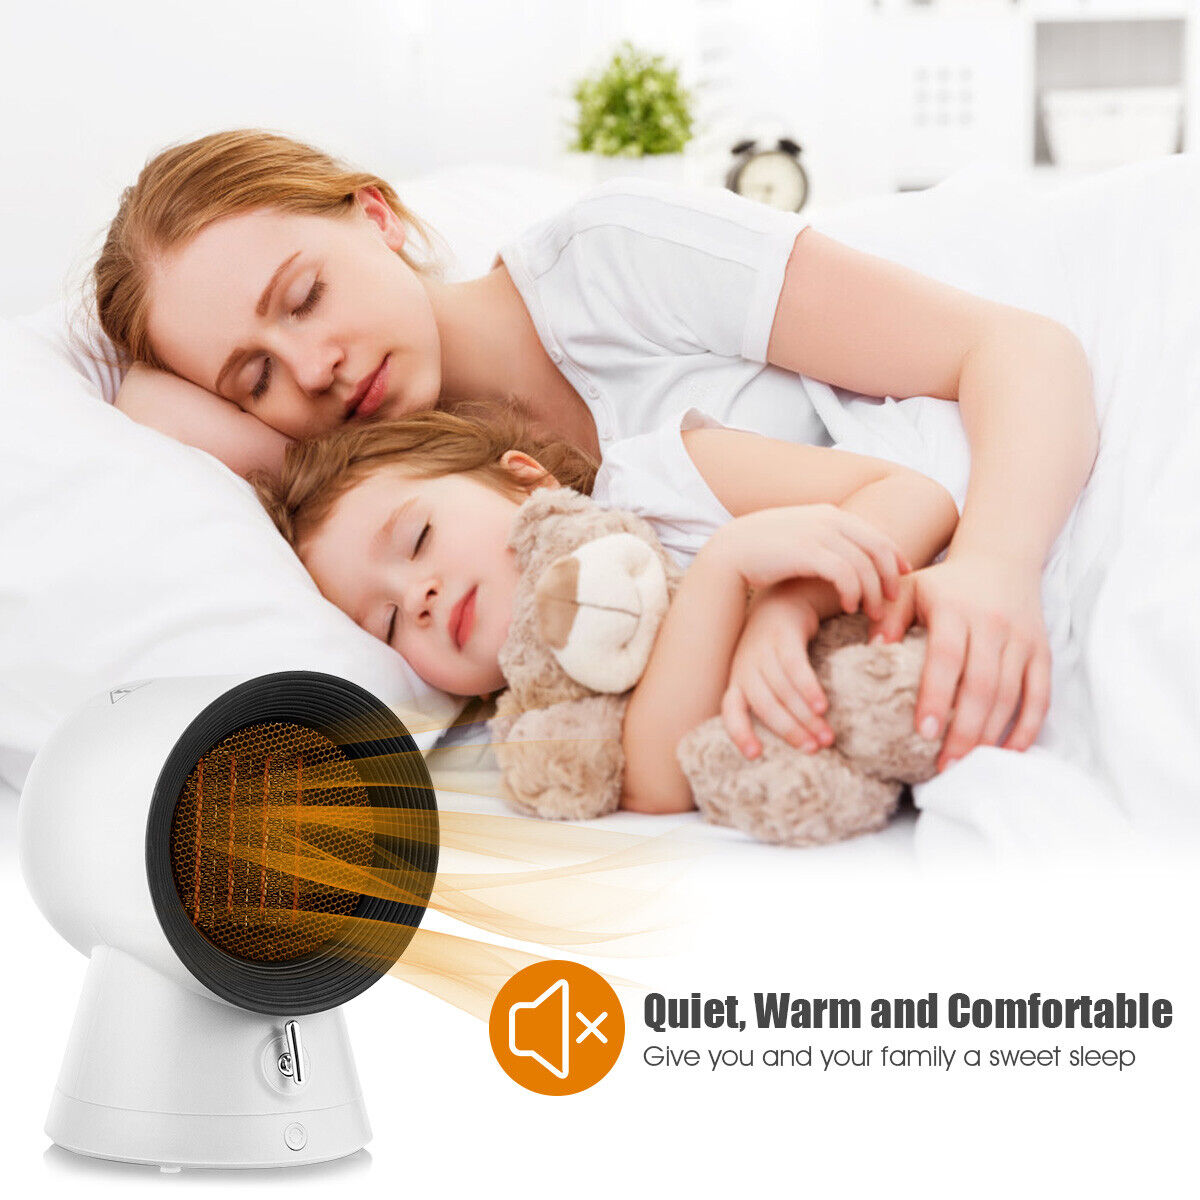 Great Choice Products 1500W Portable Ptc Ceramic Space Heater Home Electric Desktop Heating Fan White